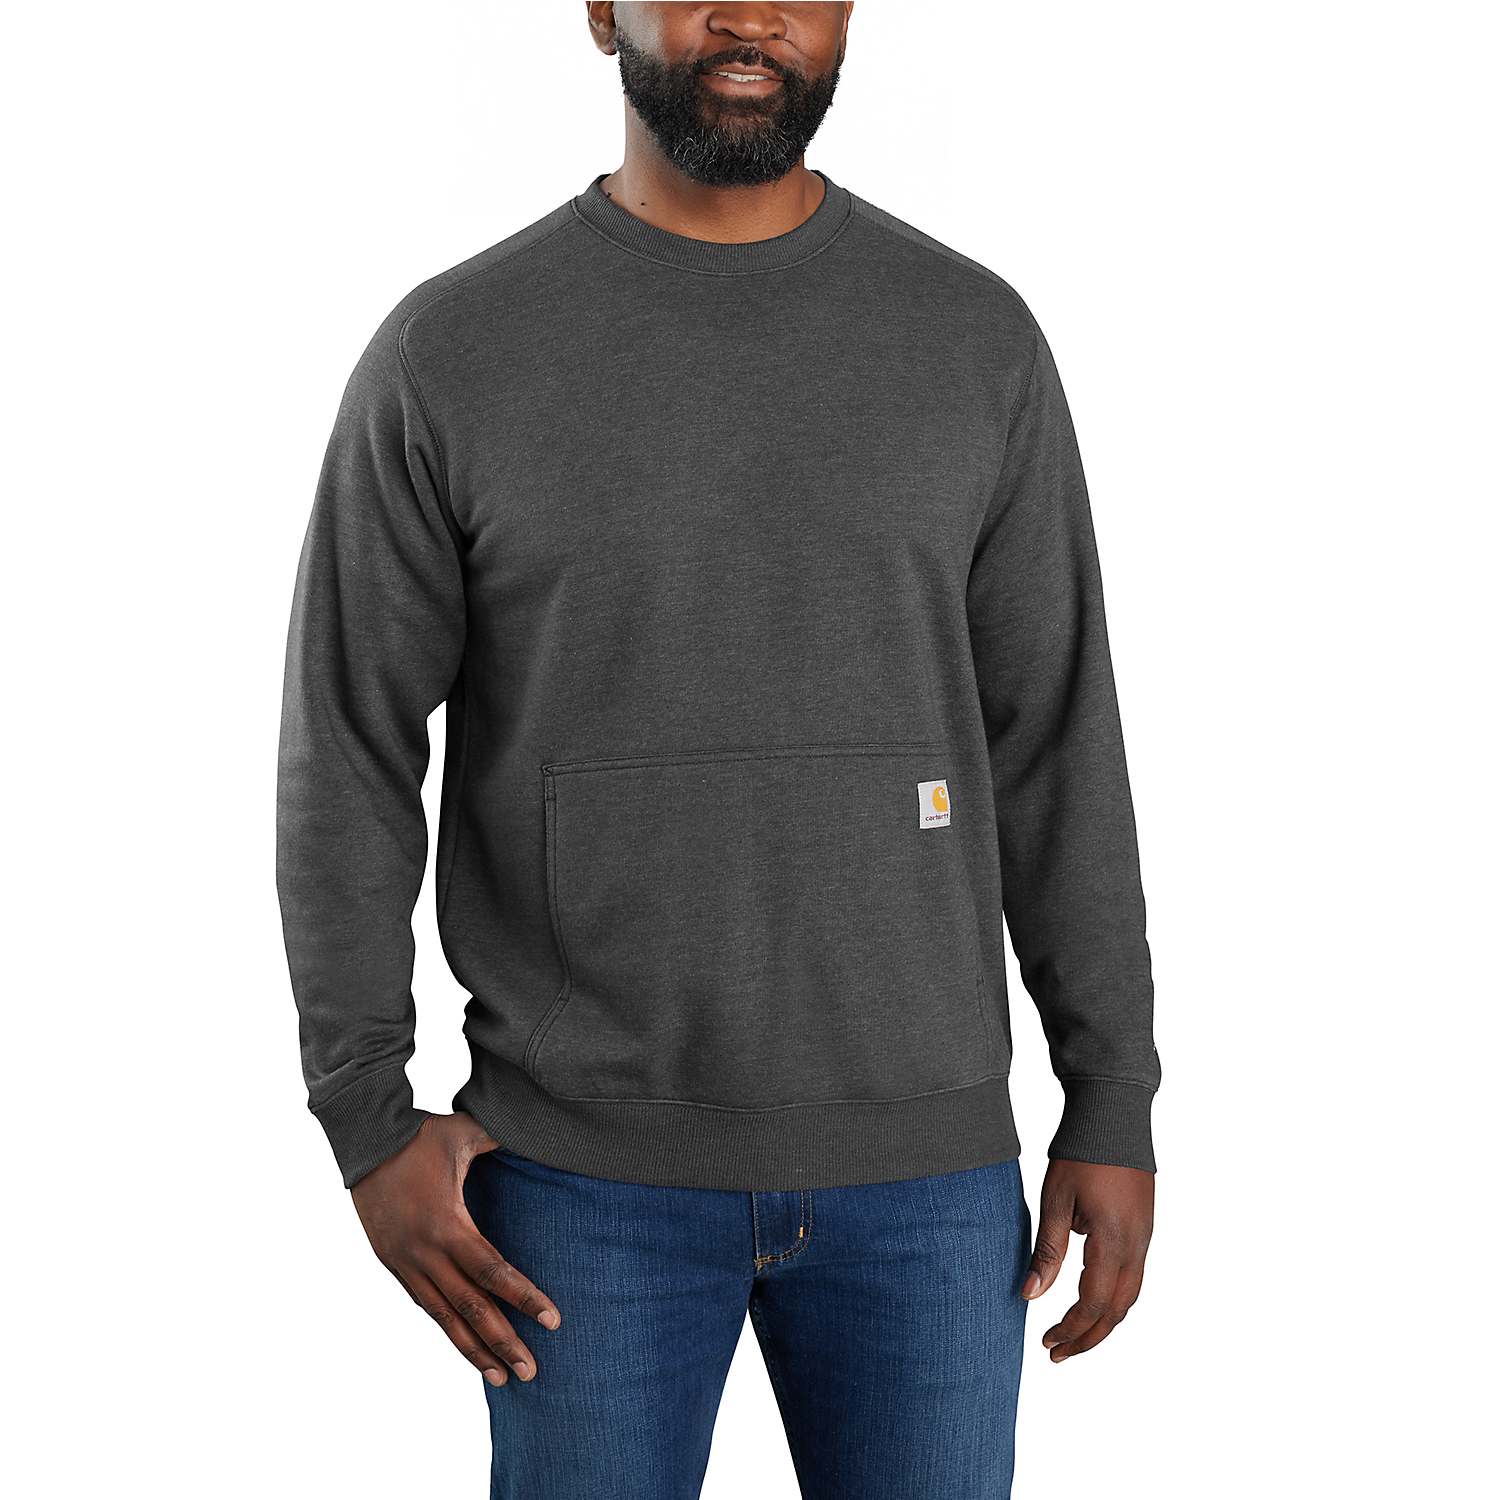 Force Relaxed Fit Crewneck Sweatshirt - 105568- Carbon Heather - Rough ...